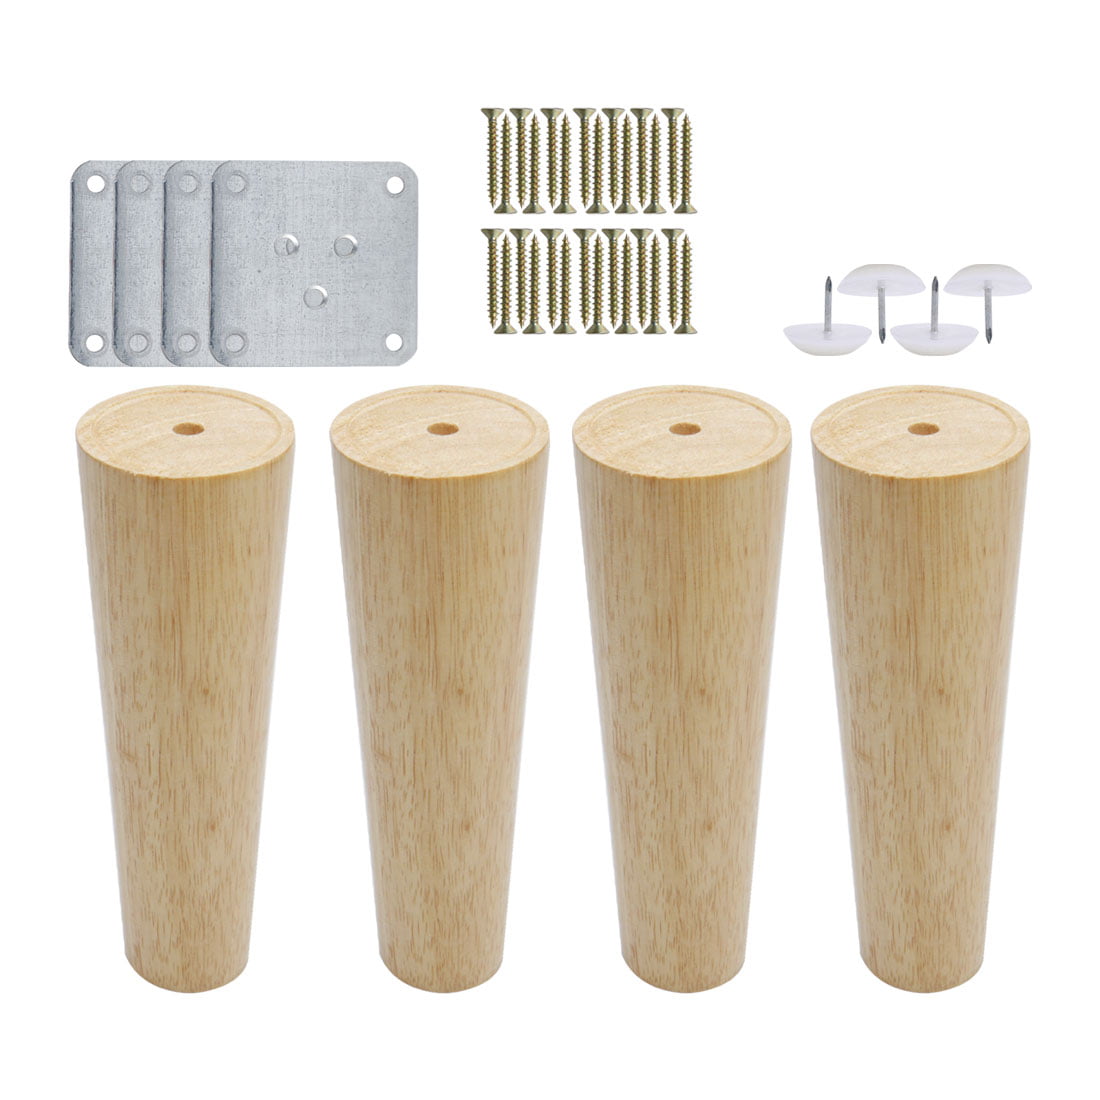 4 Pieces 10cm Height Round Oblique Wood Furniture Legs Sofa Feet Replace 